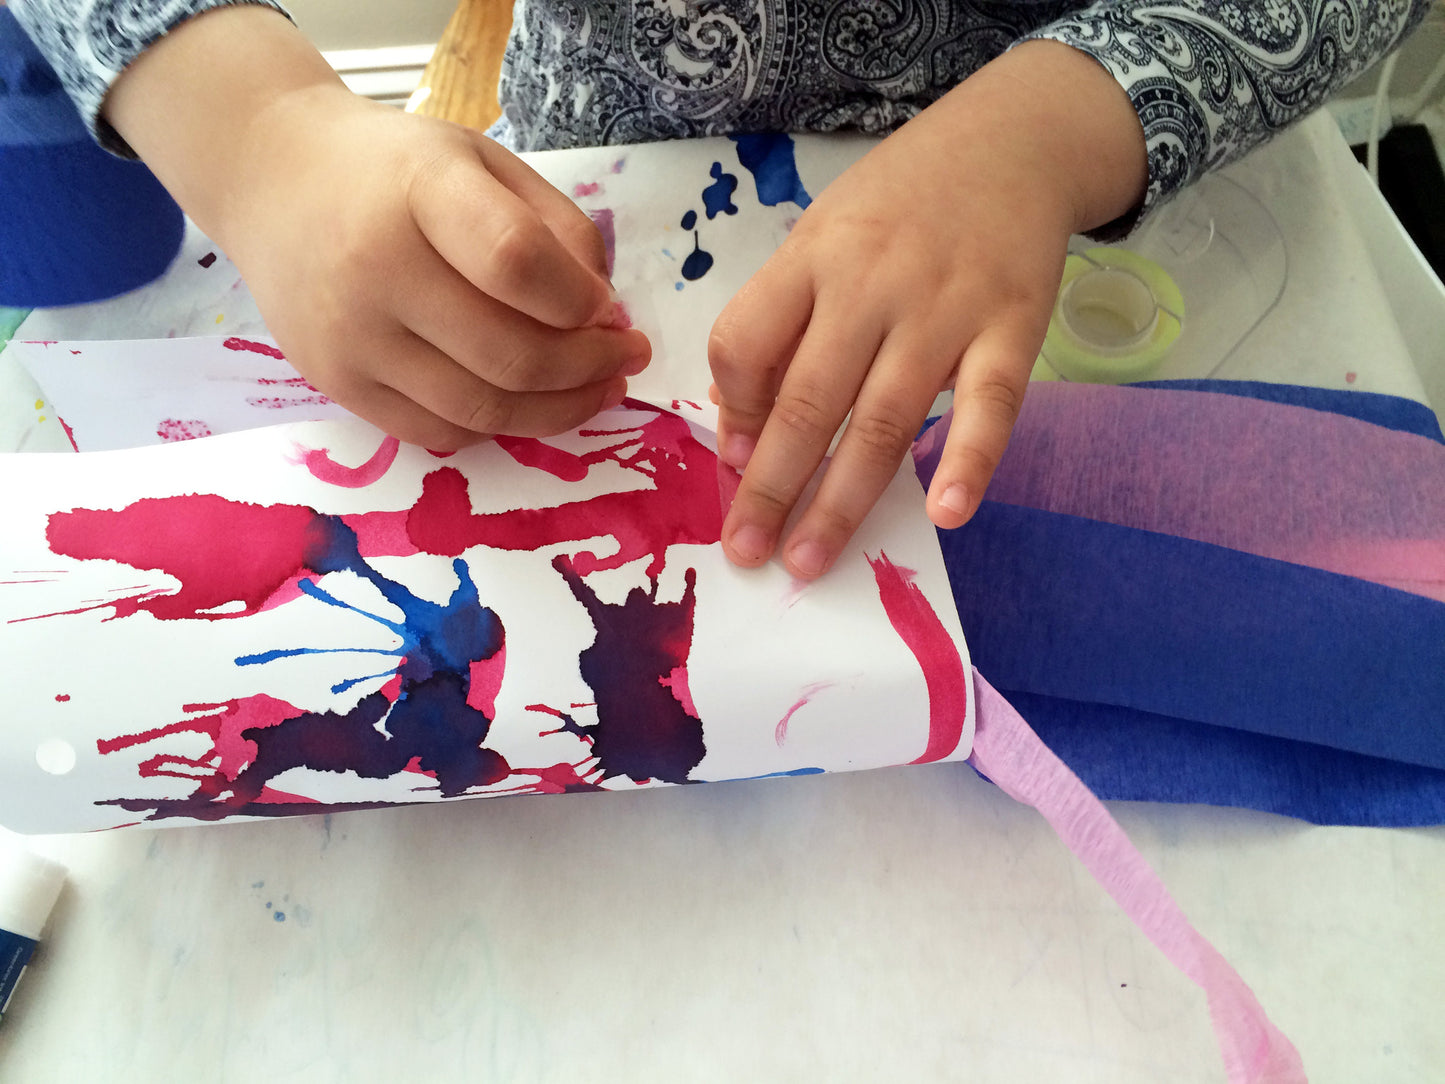 Make your own wind sock to go along with May's Ivy Kids kit featuring the book The Wind Blew by Pat Hutchins. 